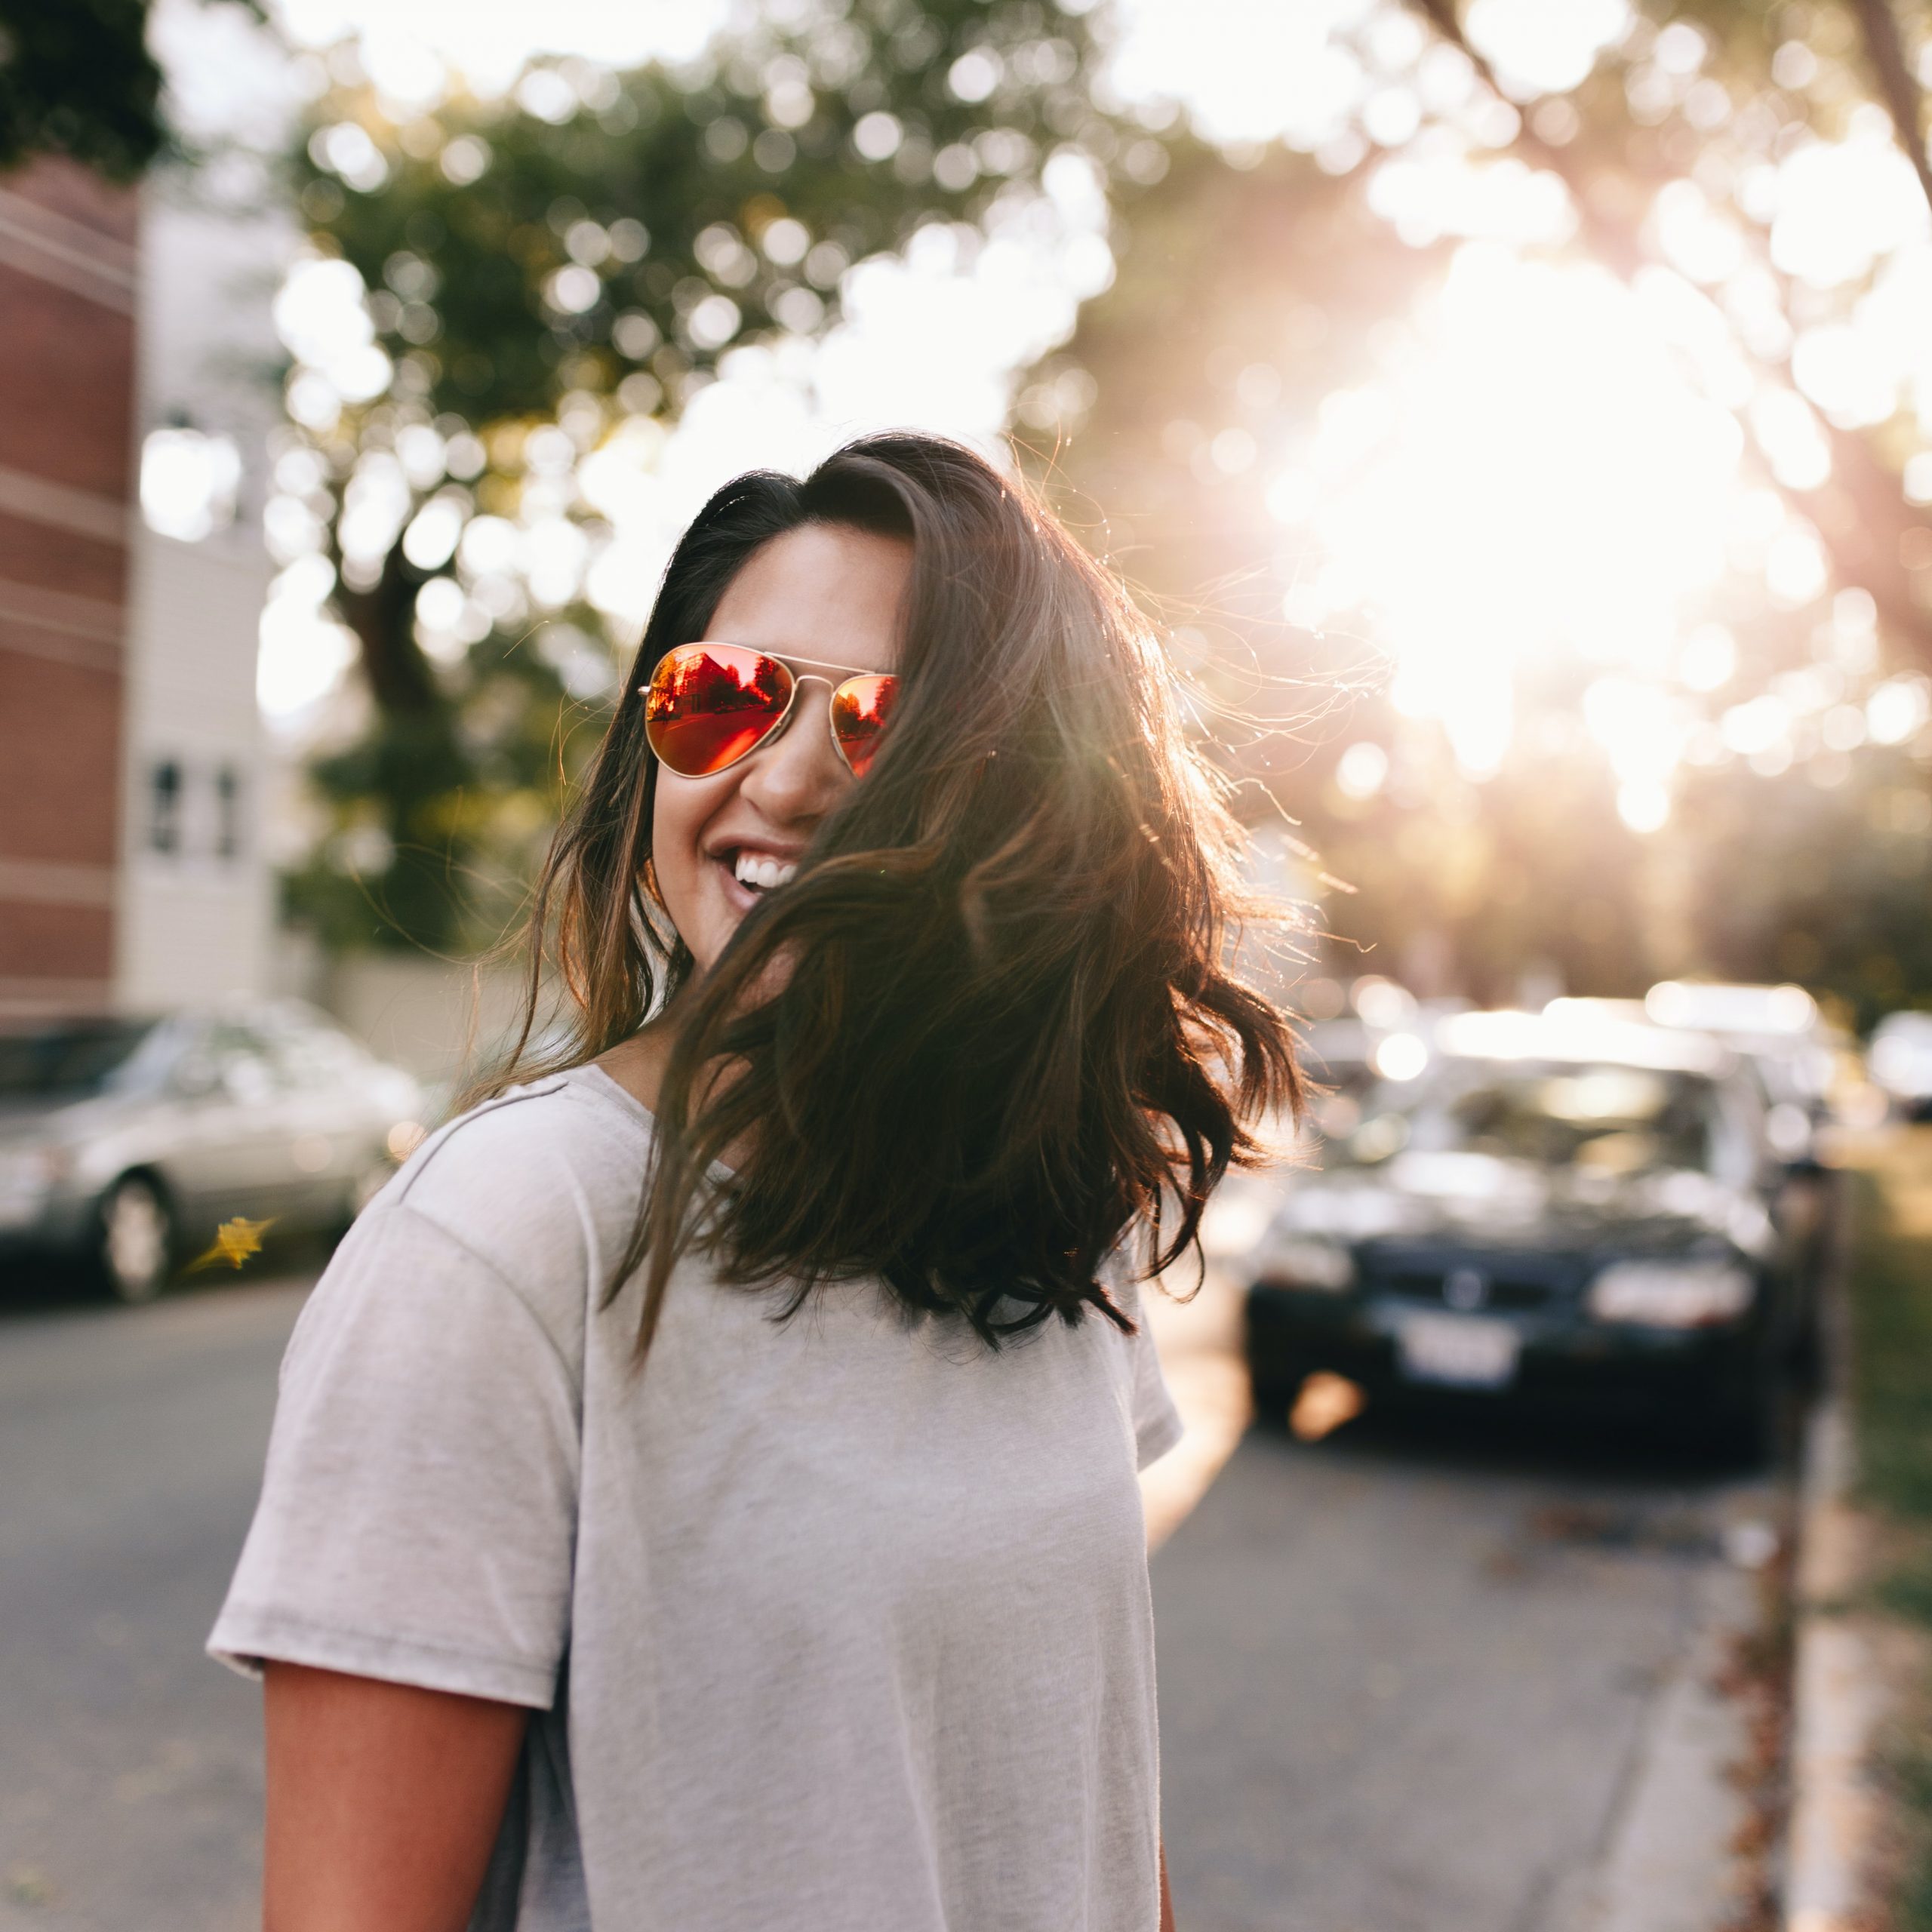 An image of a woman walking down the street with sunglasses on.